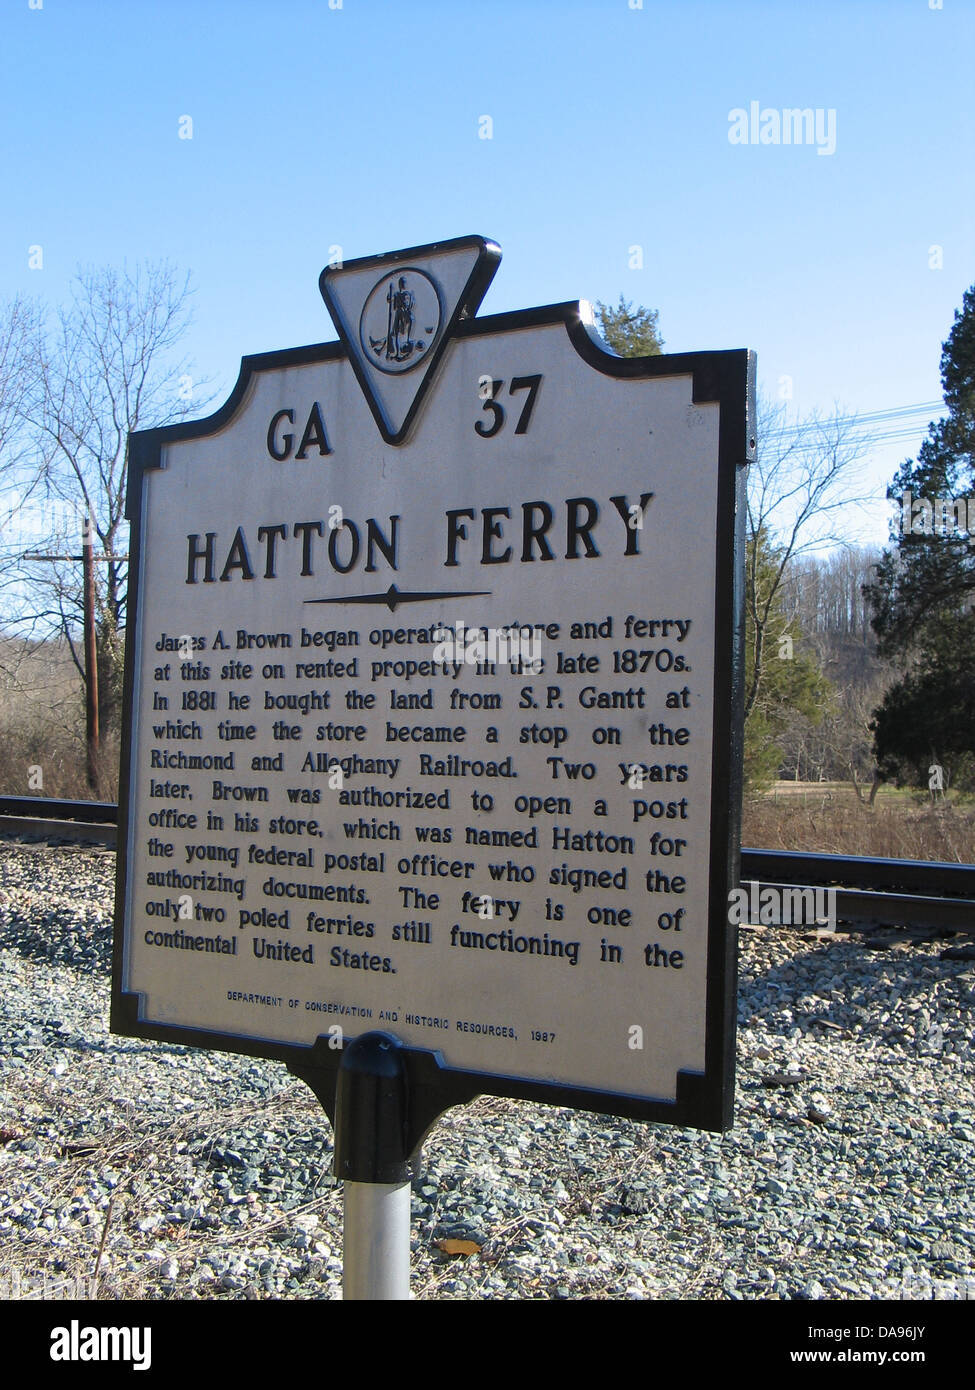 HATTON FERRY James A. Brown began operating a store and ferry at this site on rented property in the late 1870s. In 1881 he bought the land from S. P. Gantt at which time the store became a stop on the Richmond and Alleghany Railroad. Two years later. Brown was authorized to open a post office in his store, which was named Hatton for the young federal postal officer who signed the authorizing documents. The ferry is one of the only two poled ferries still functioning in the continental United States. Department of Conservation and Historic Resources, 1987. Stock Photo